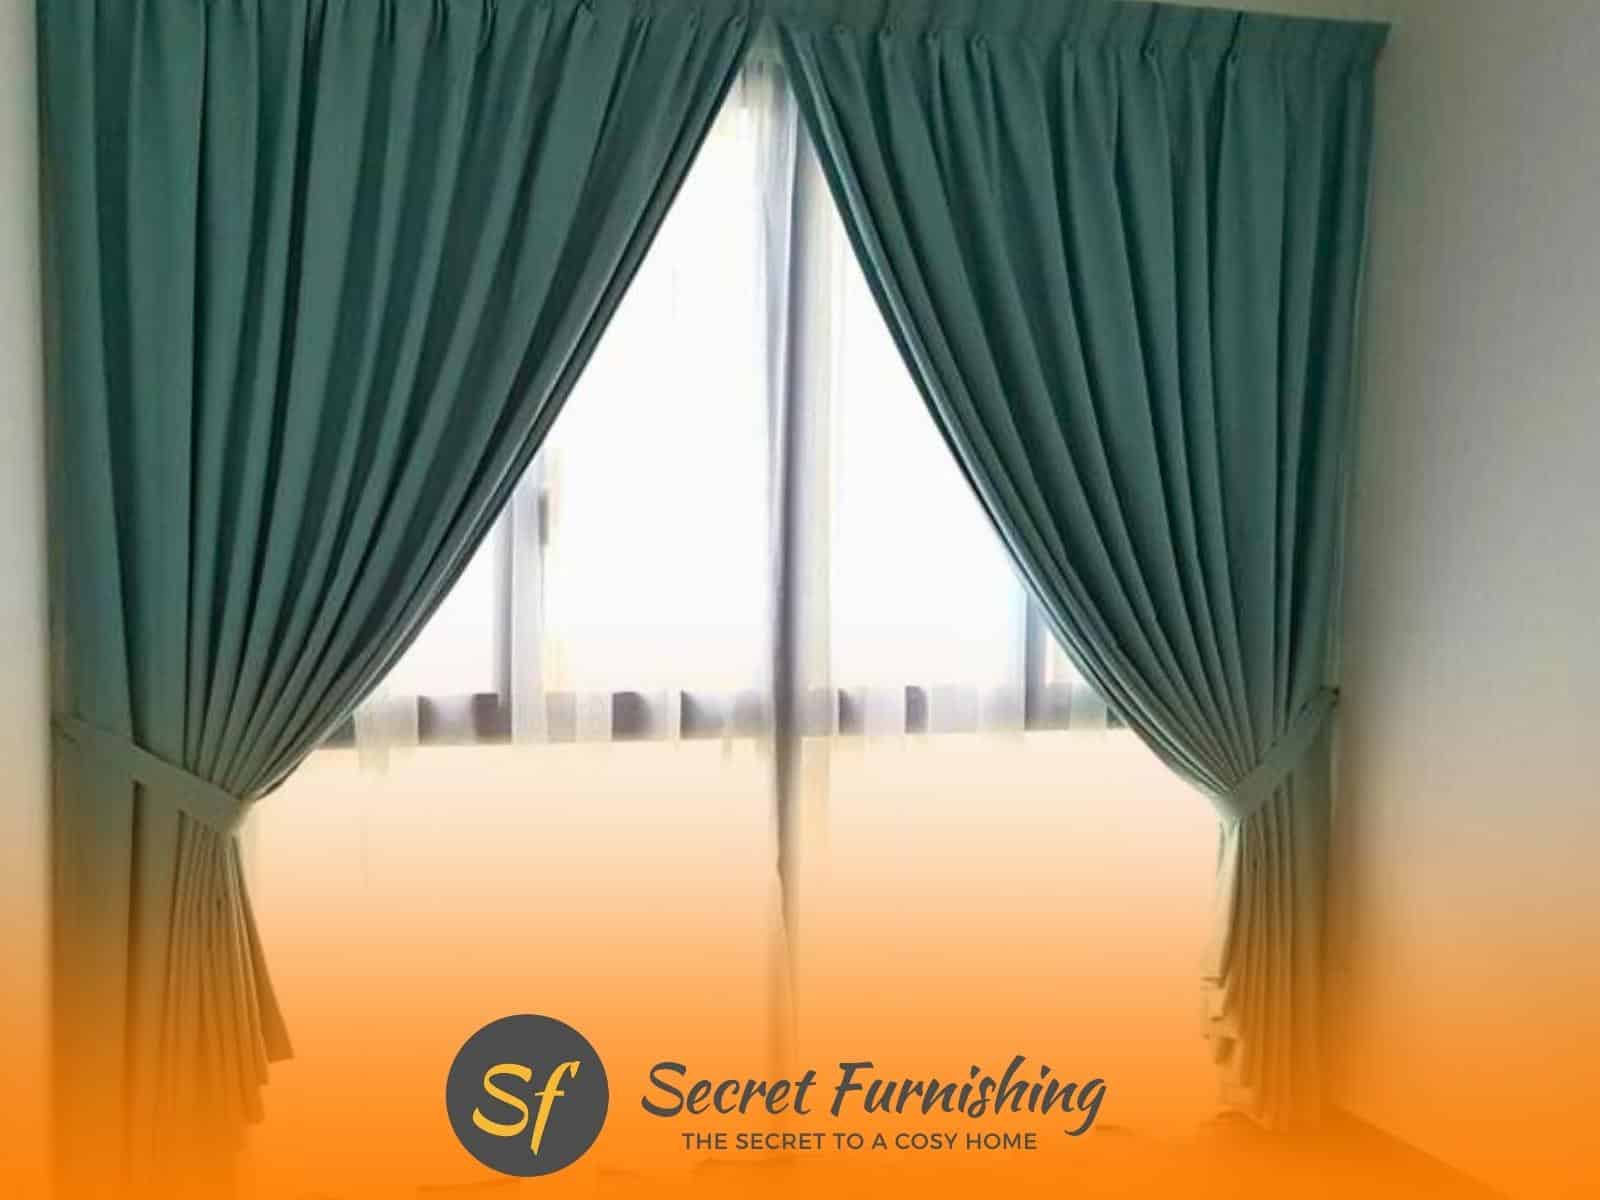 Curtains with moisture-resistant fabrics